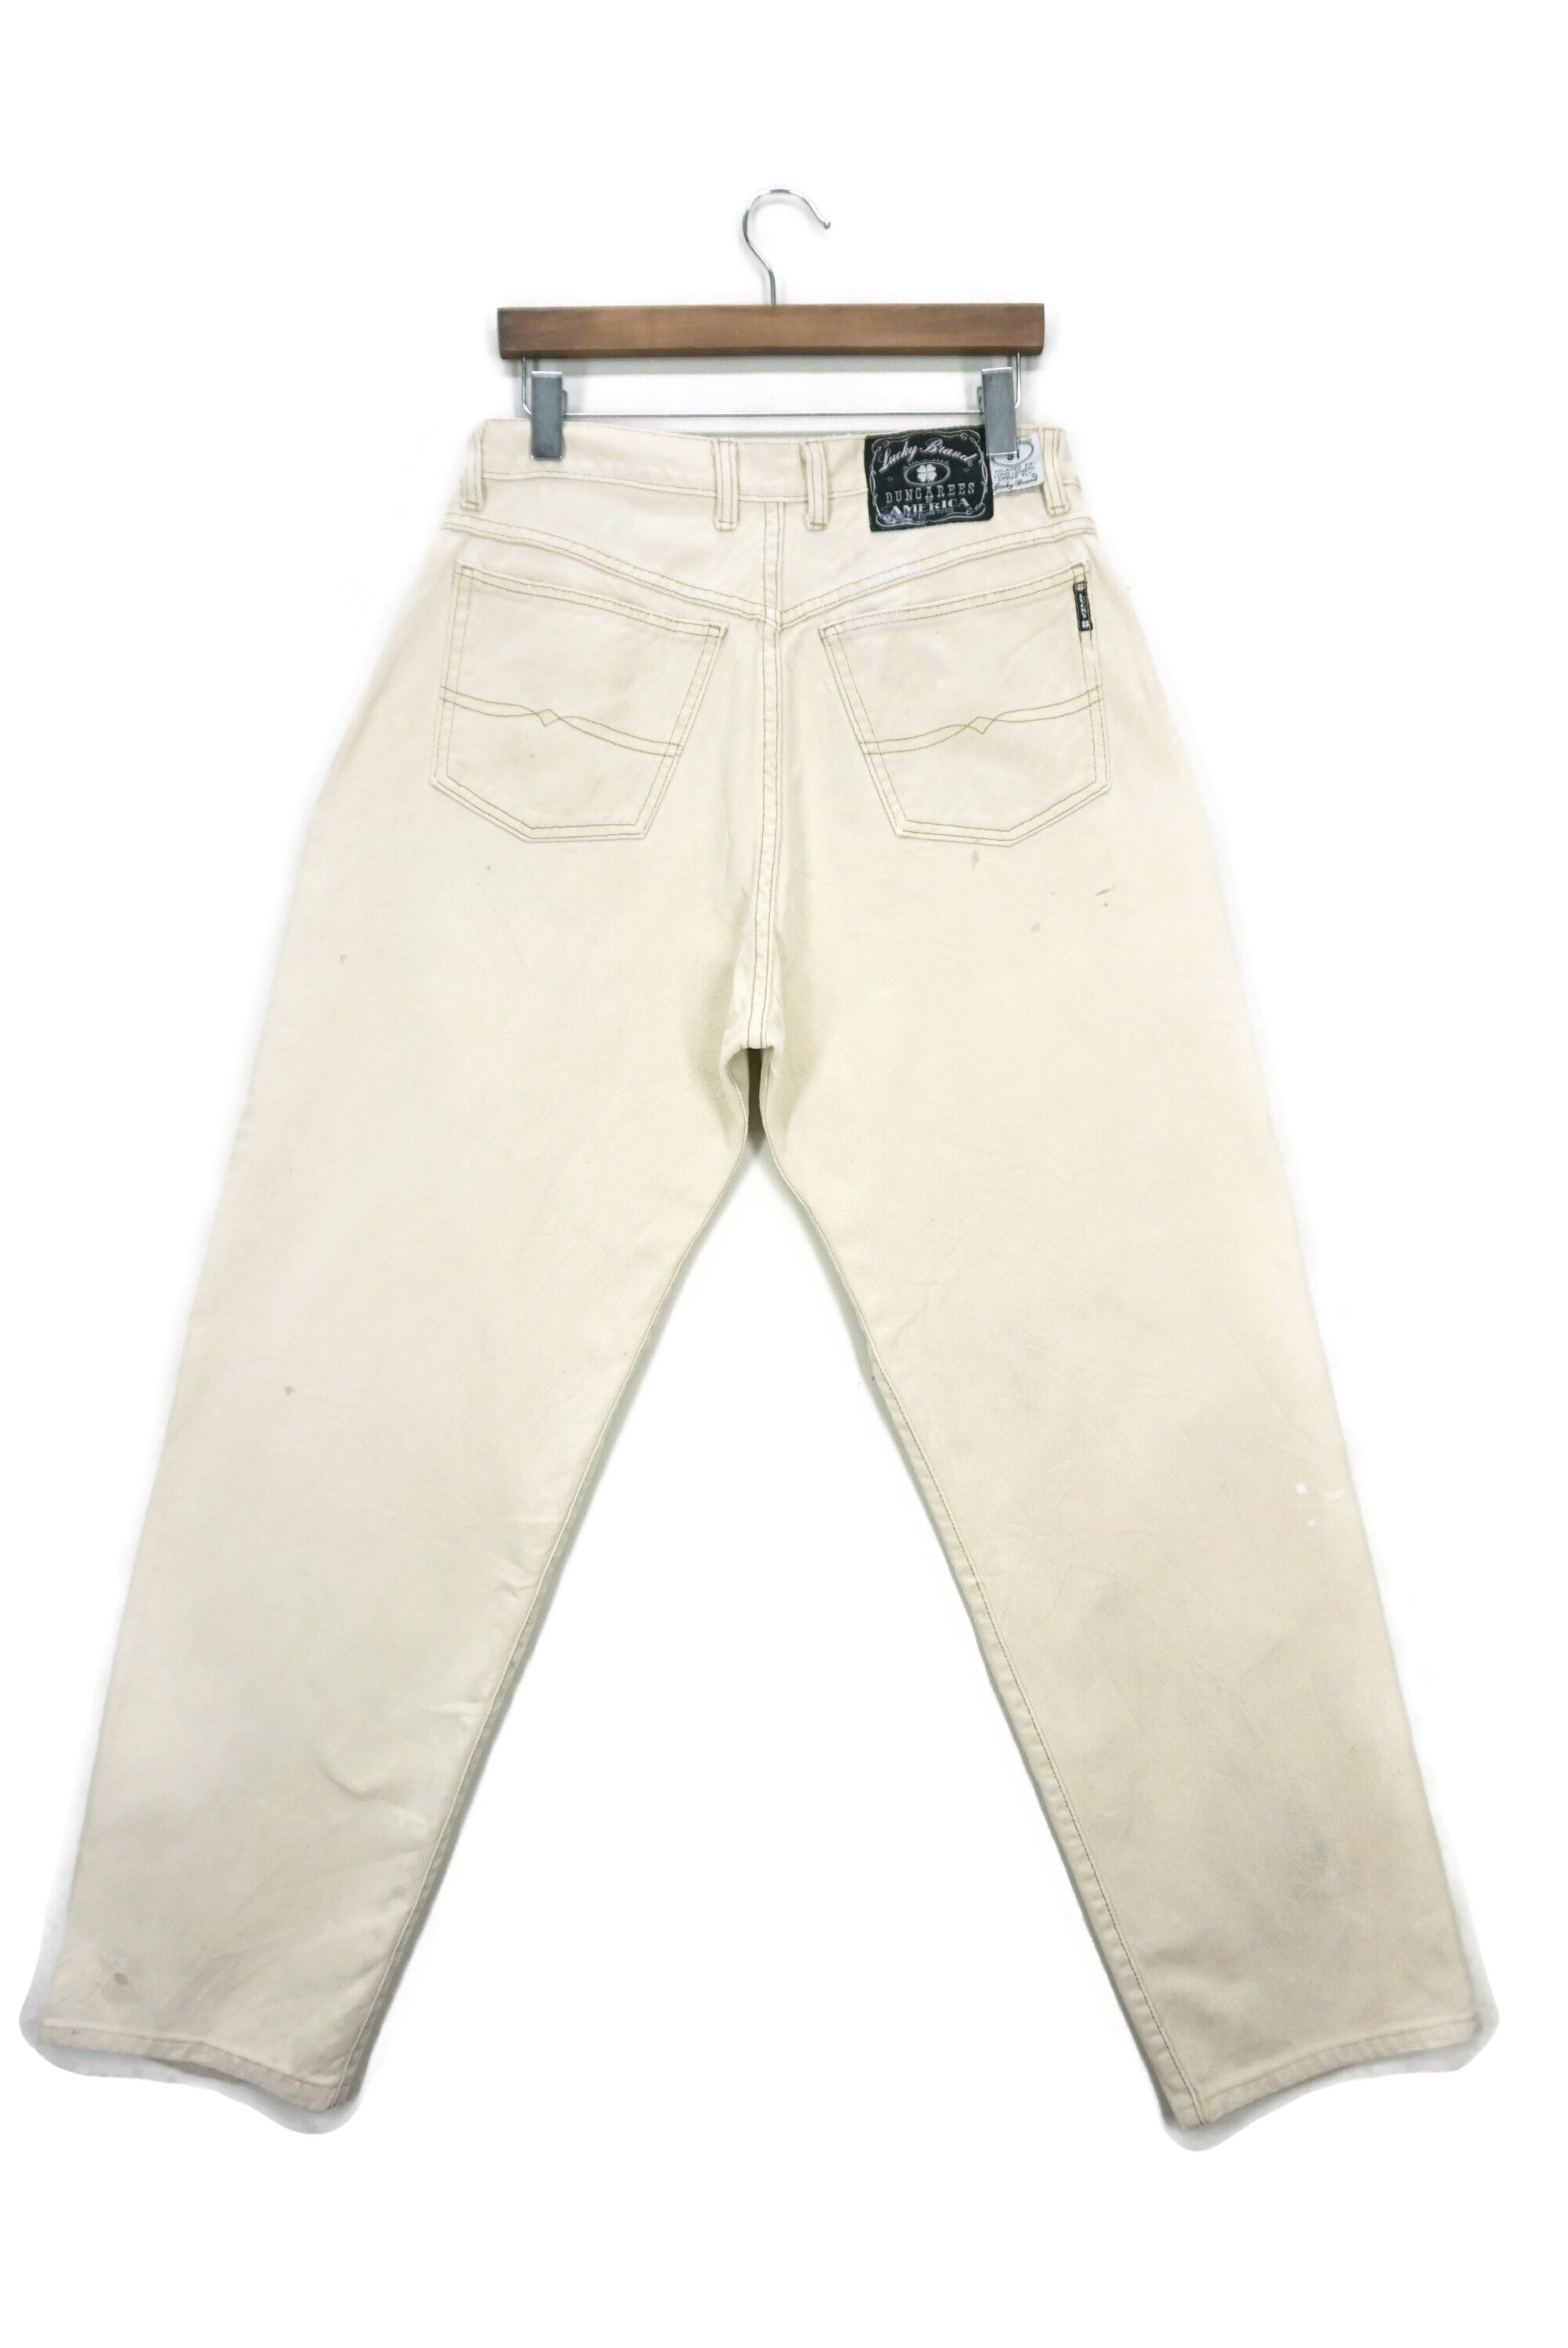 Lucky Brand by Gene Montesano Vintage Carpenter Hickory Workwear Dungarees  Pants Made in USA - Pants